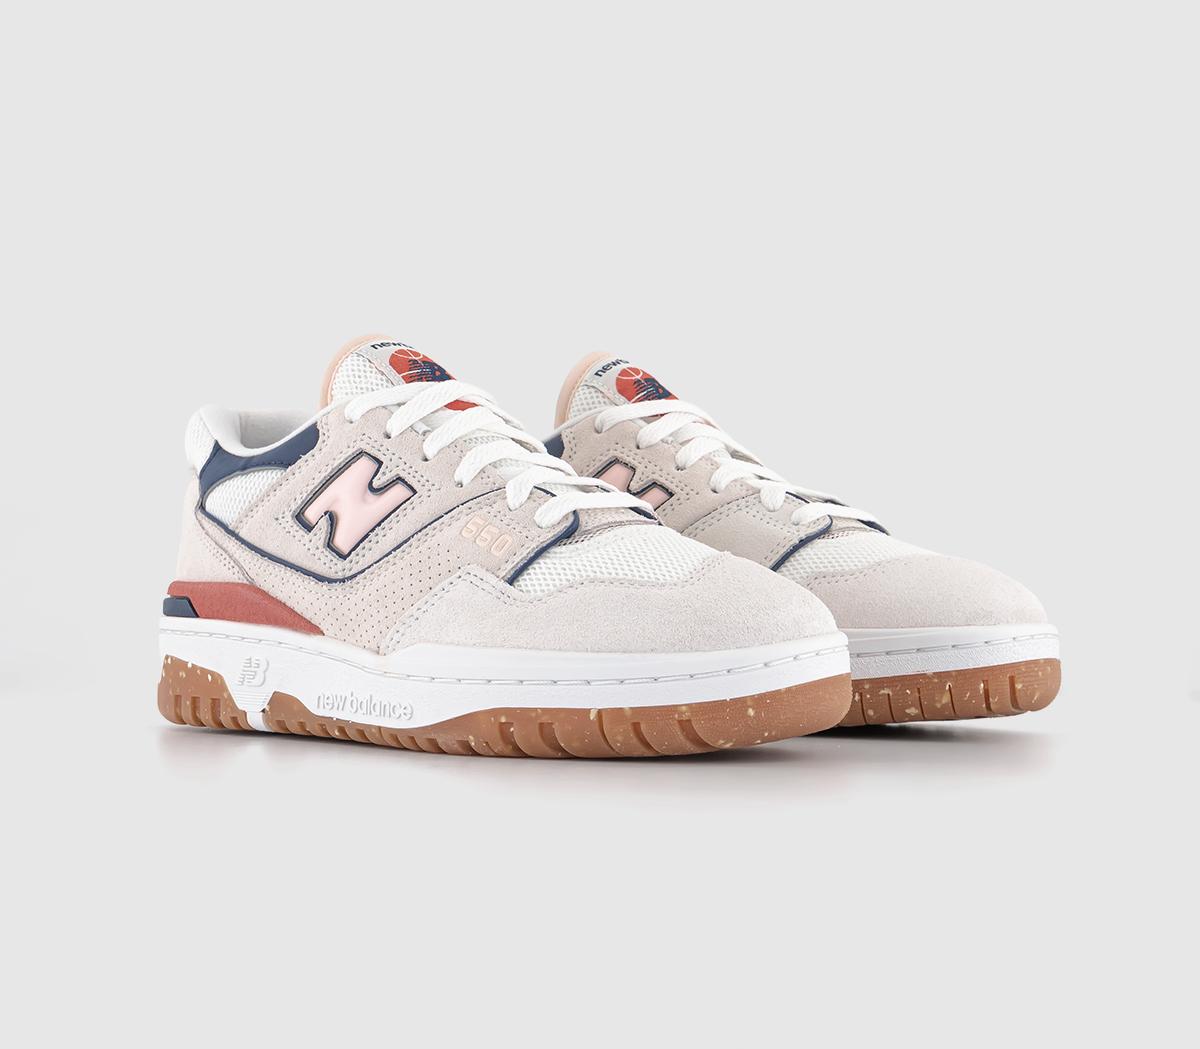 New Balance BB550 Trainers Sea Salt Navy Red - Women's Trainers